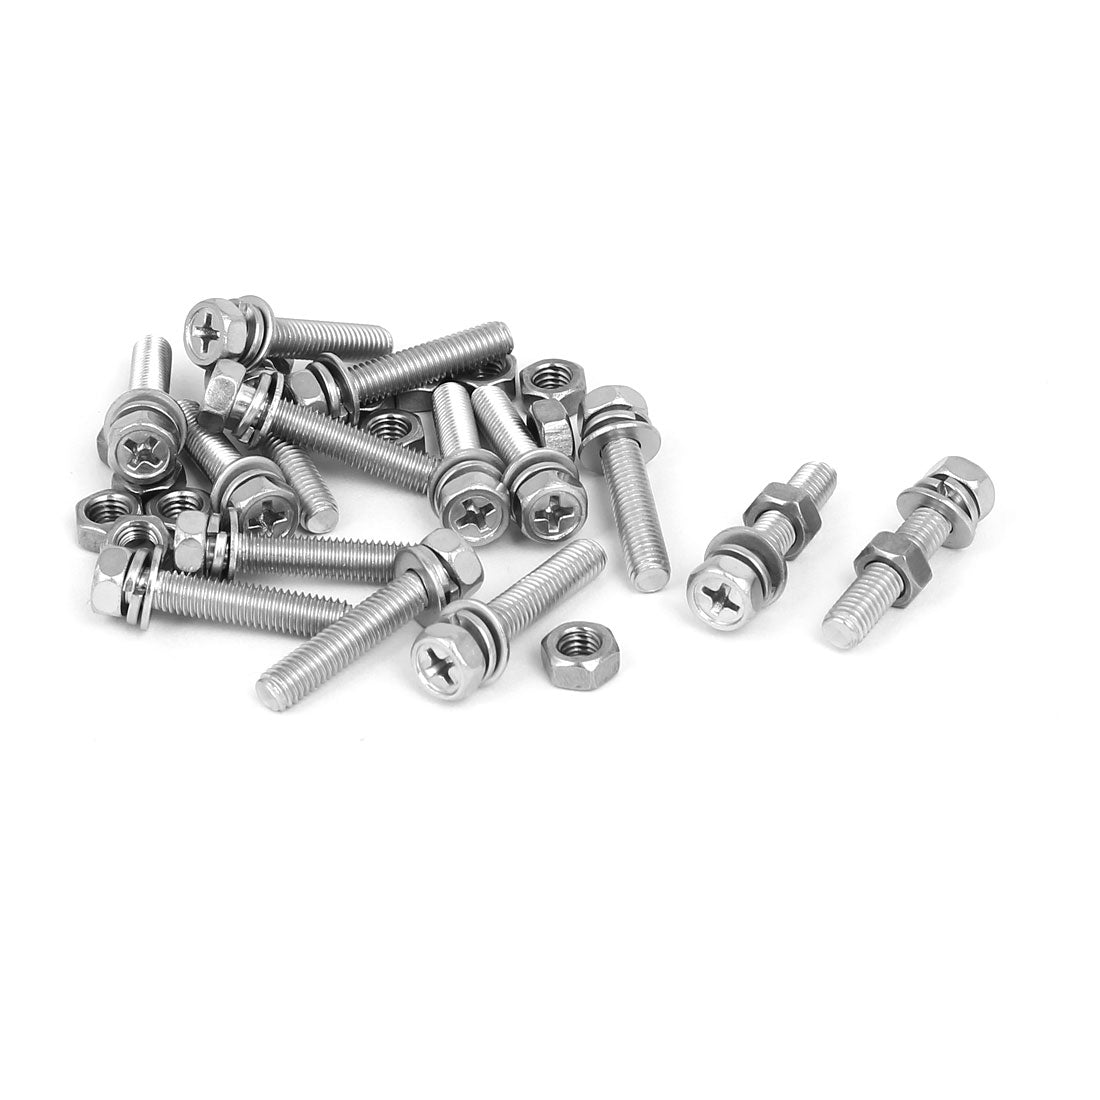 uxcell Uxcell M5 x 25mm 304 Stainless Steel Phillips Hex Head Bolts Nuts w Washers 15 Sets